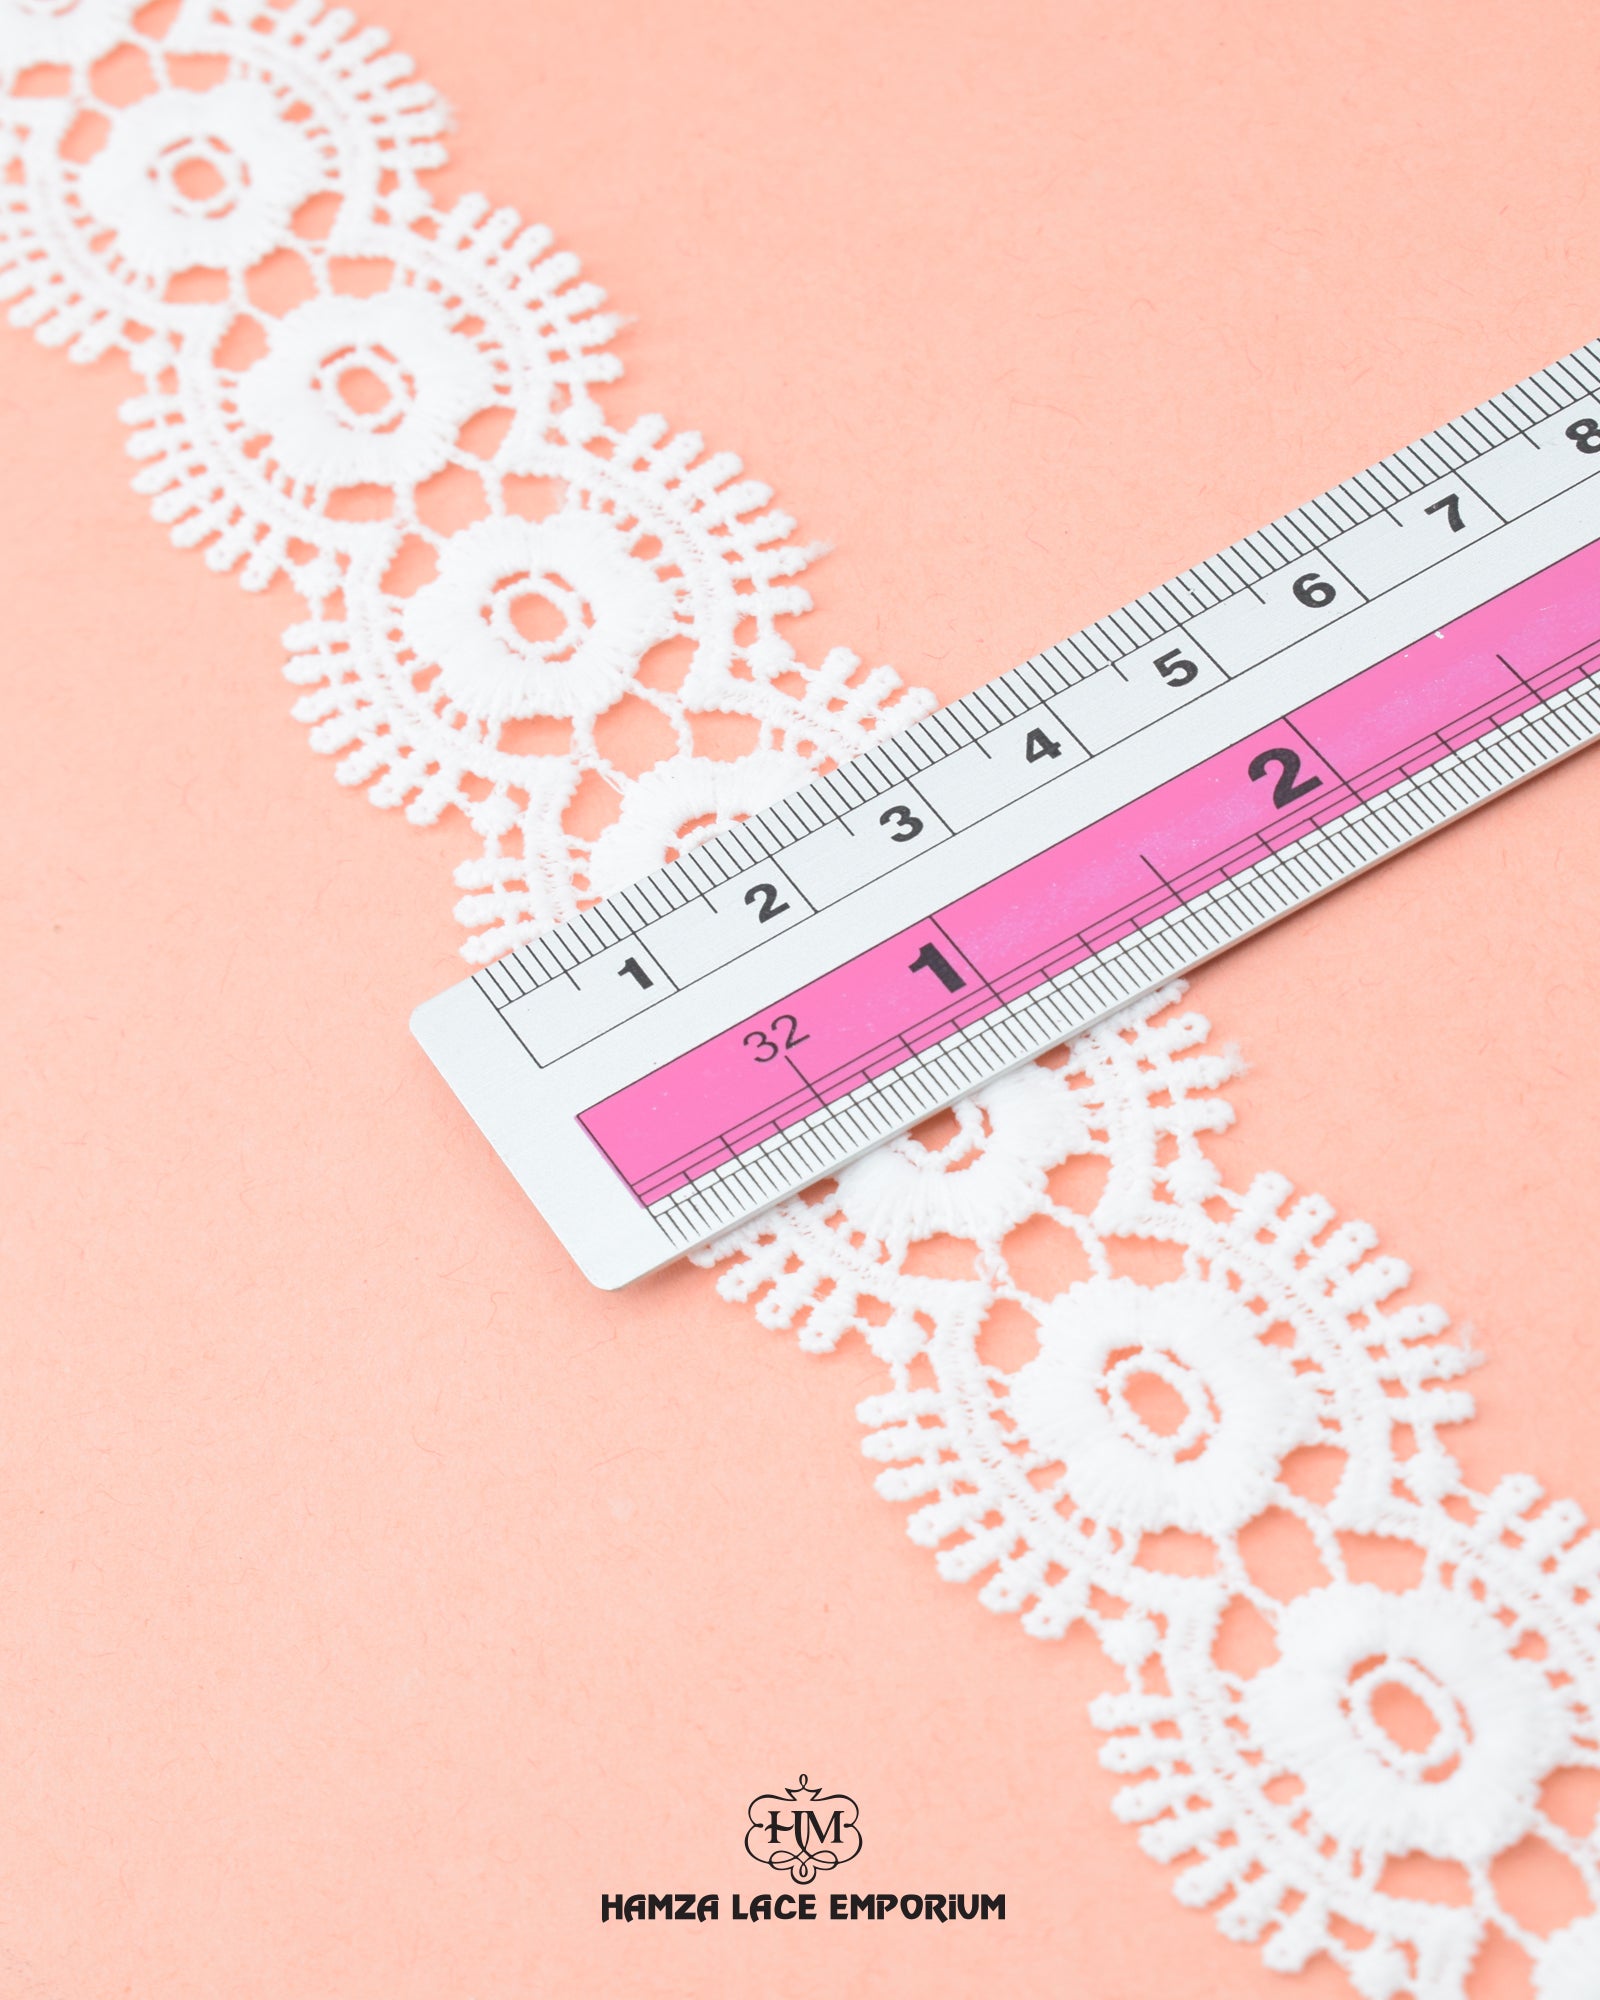 The size of the 'Center Filling Lace 22521' is given as '1.5' inches by placing a ruler on it